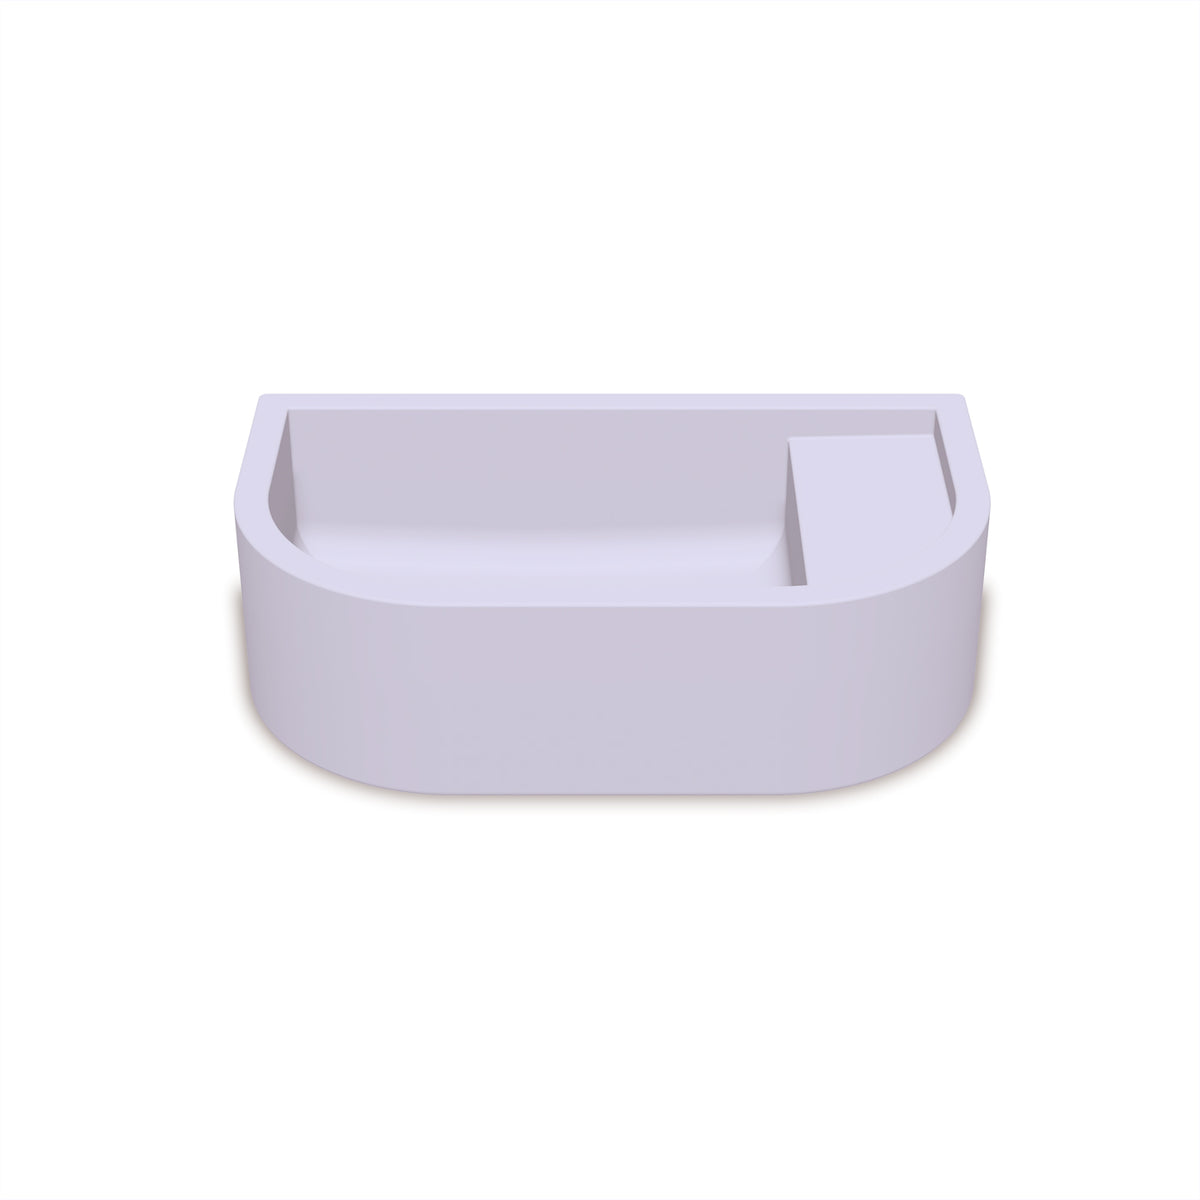 Loop 01 Basin - Overflow - Wall Hung (Lilac,No Tap Hole,White)